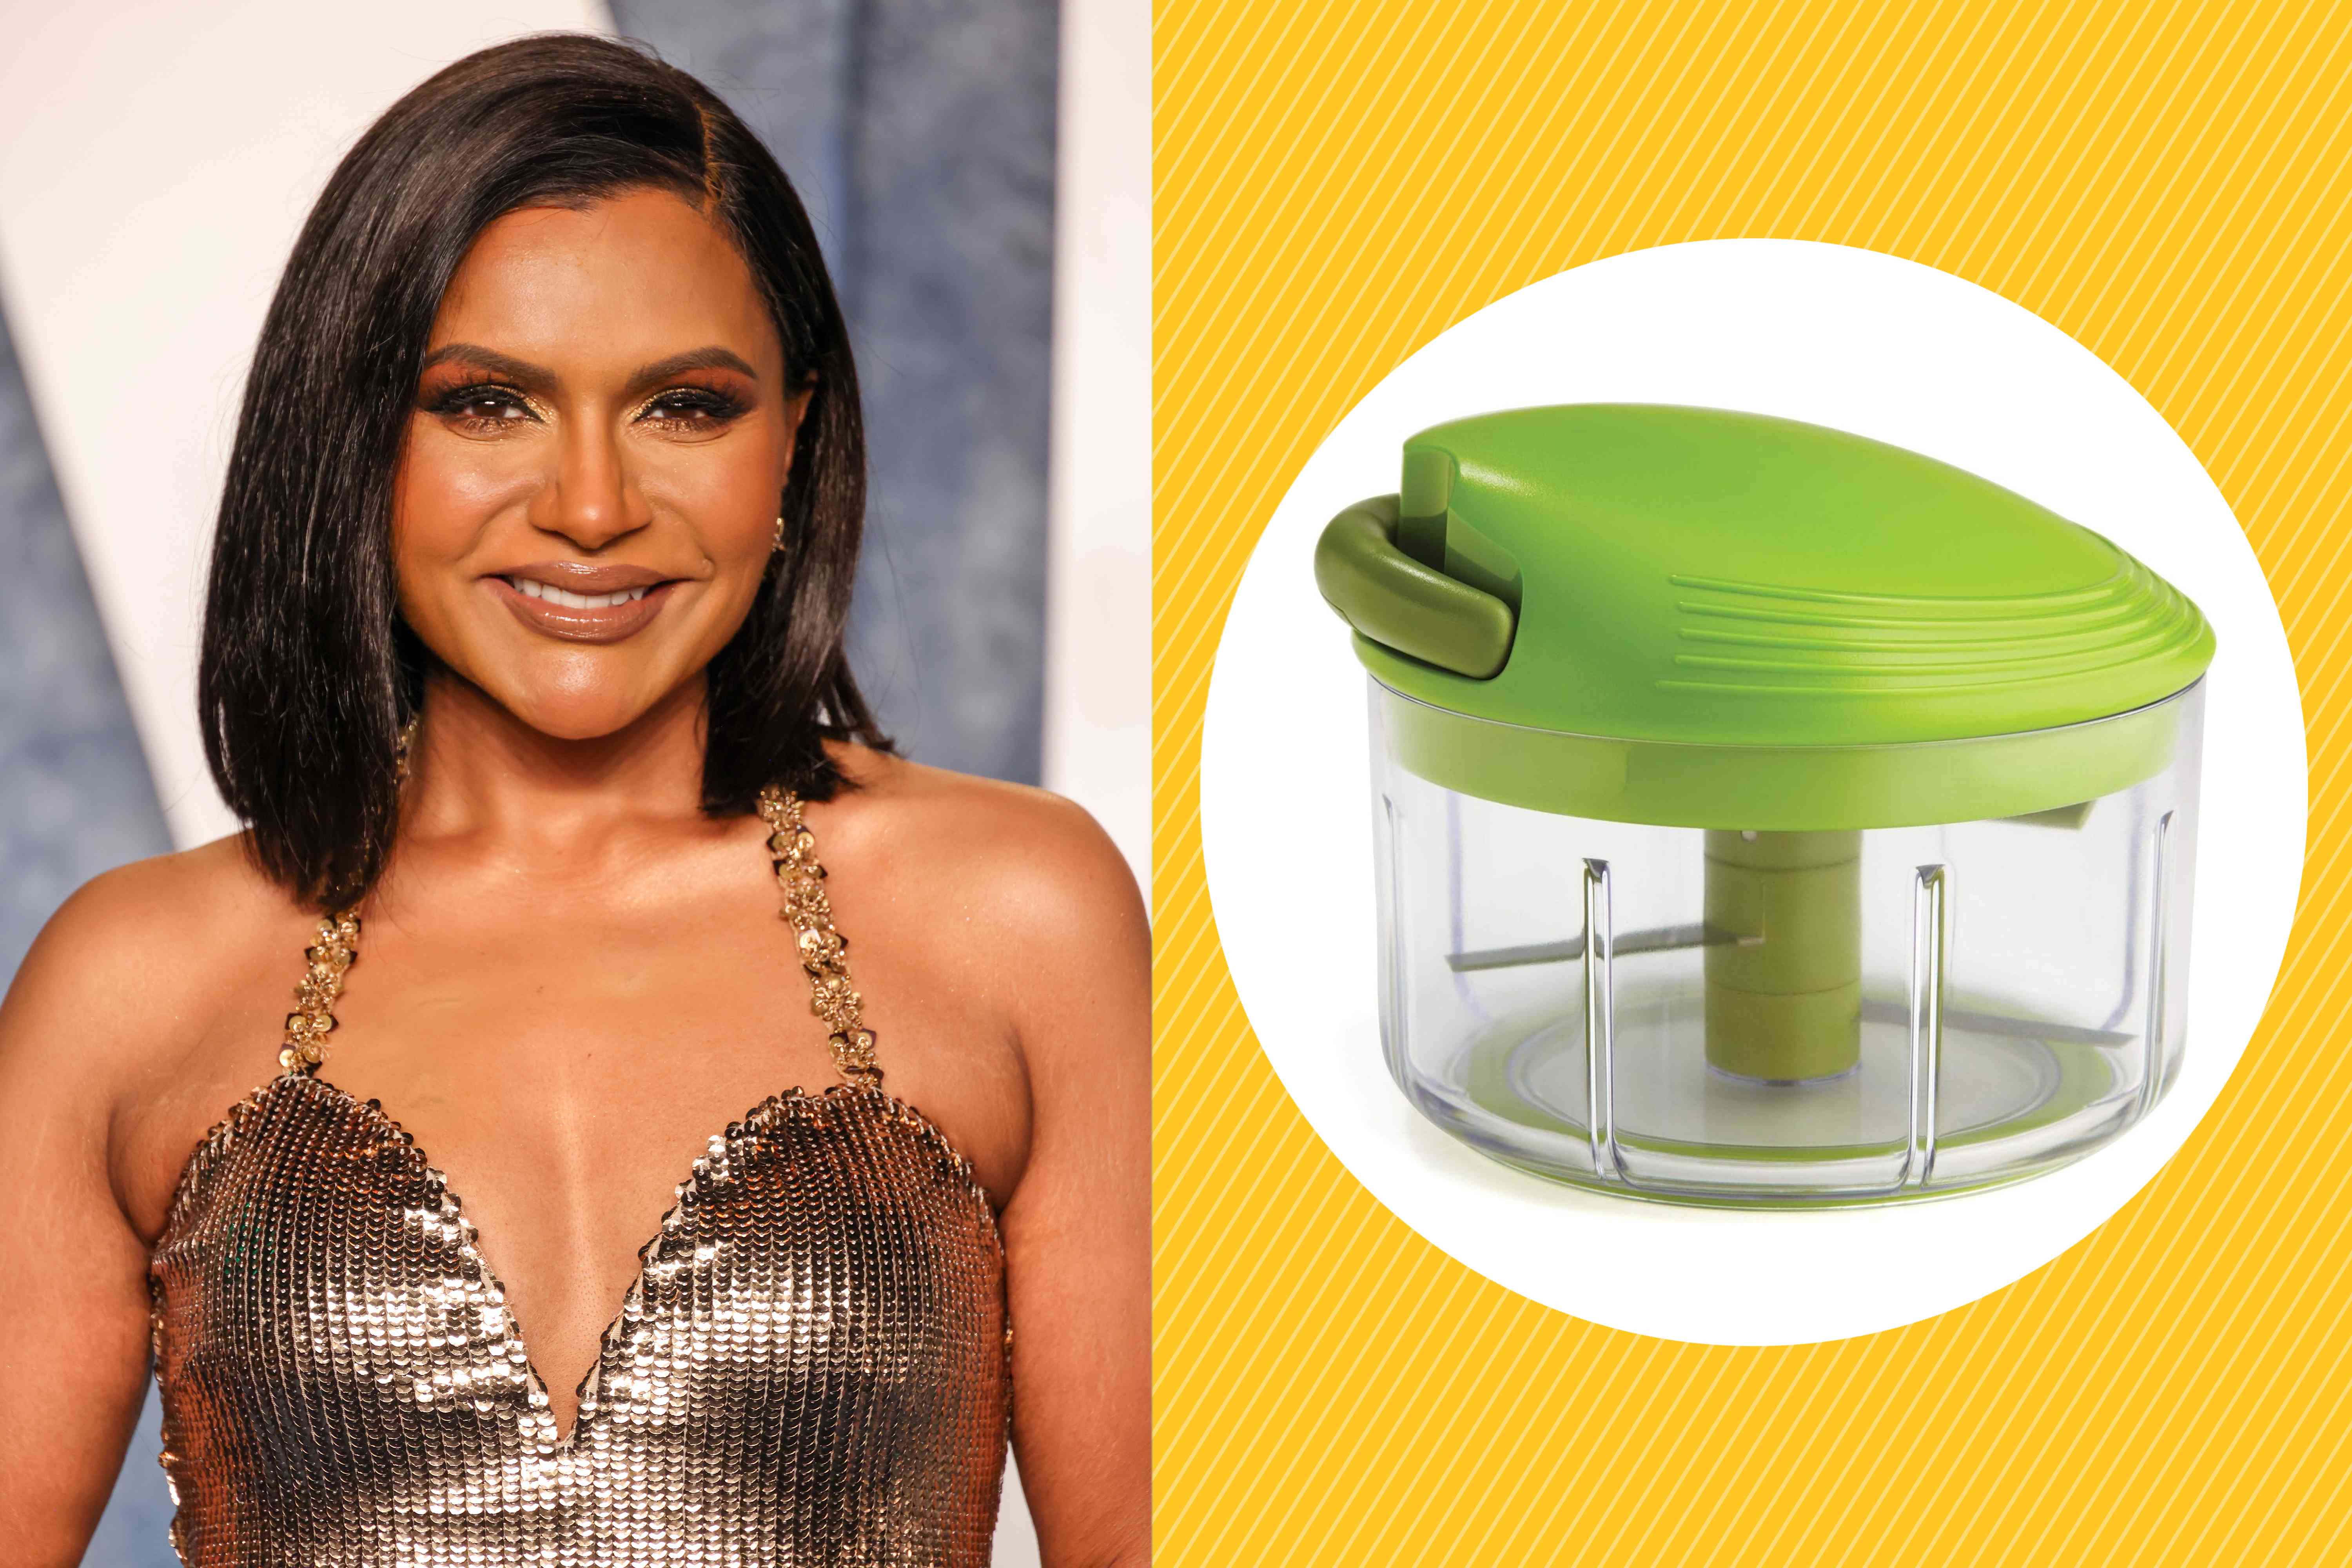 Mindy Kaling’s Clever Hack for Perfectly Chopped Vegetables in Seconds Is This Kitchen Gadget from Amazon